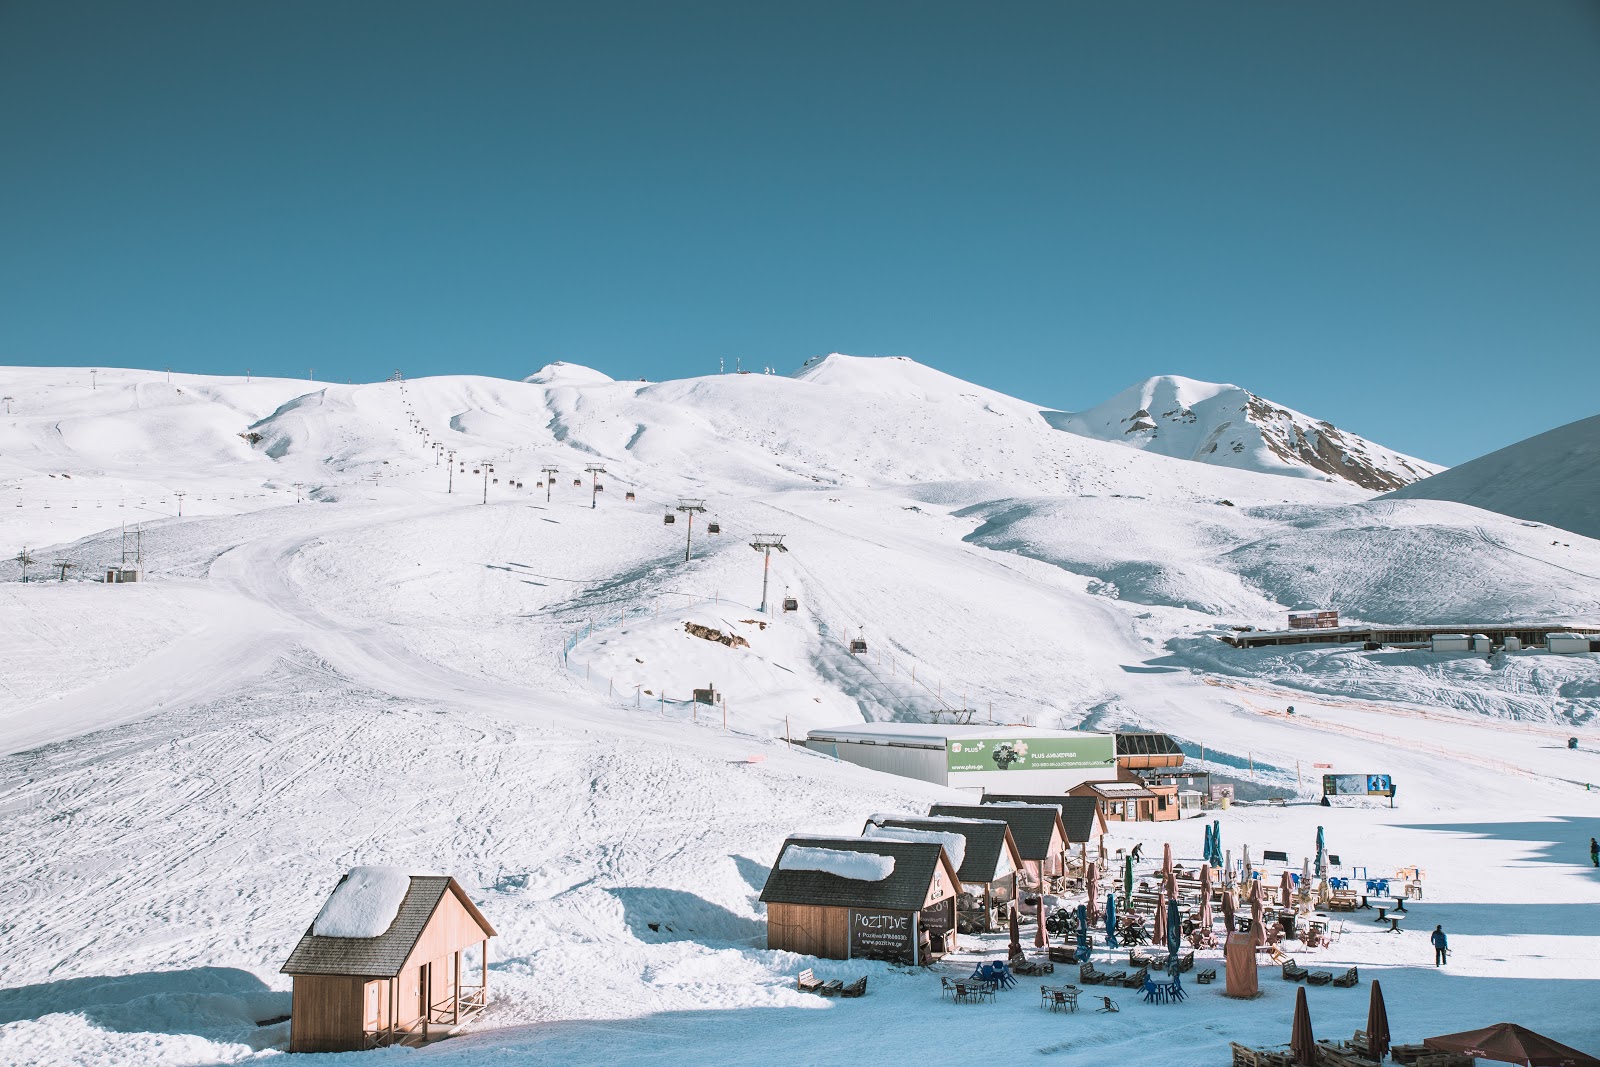 Georgian ski slopes with clear blue skies in the horizon.